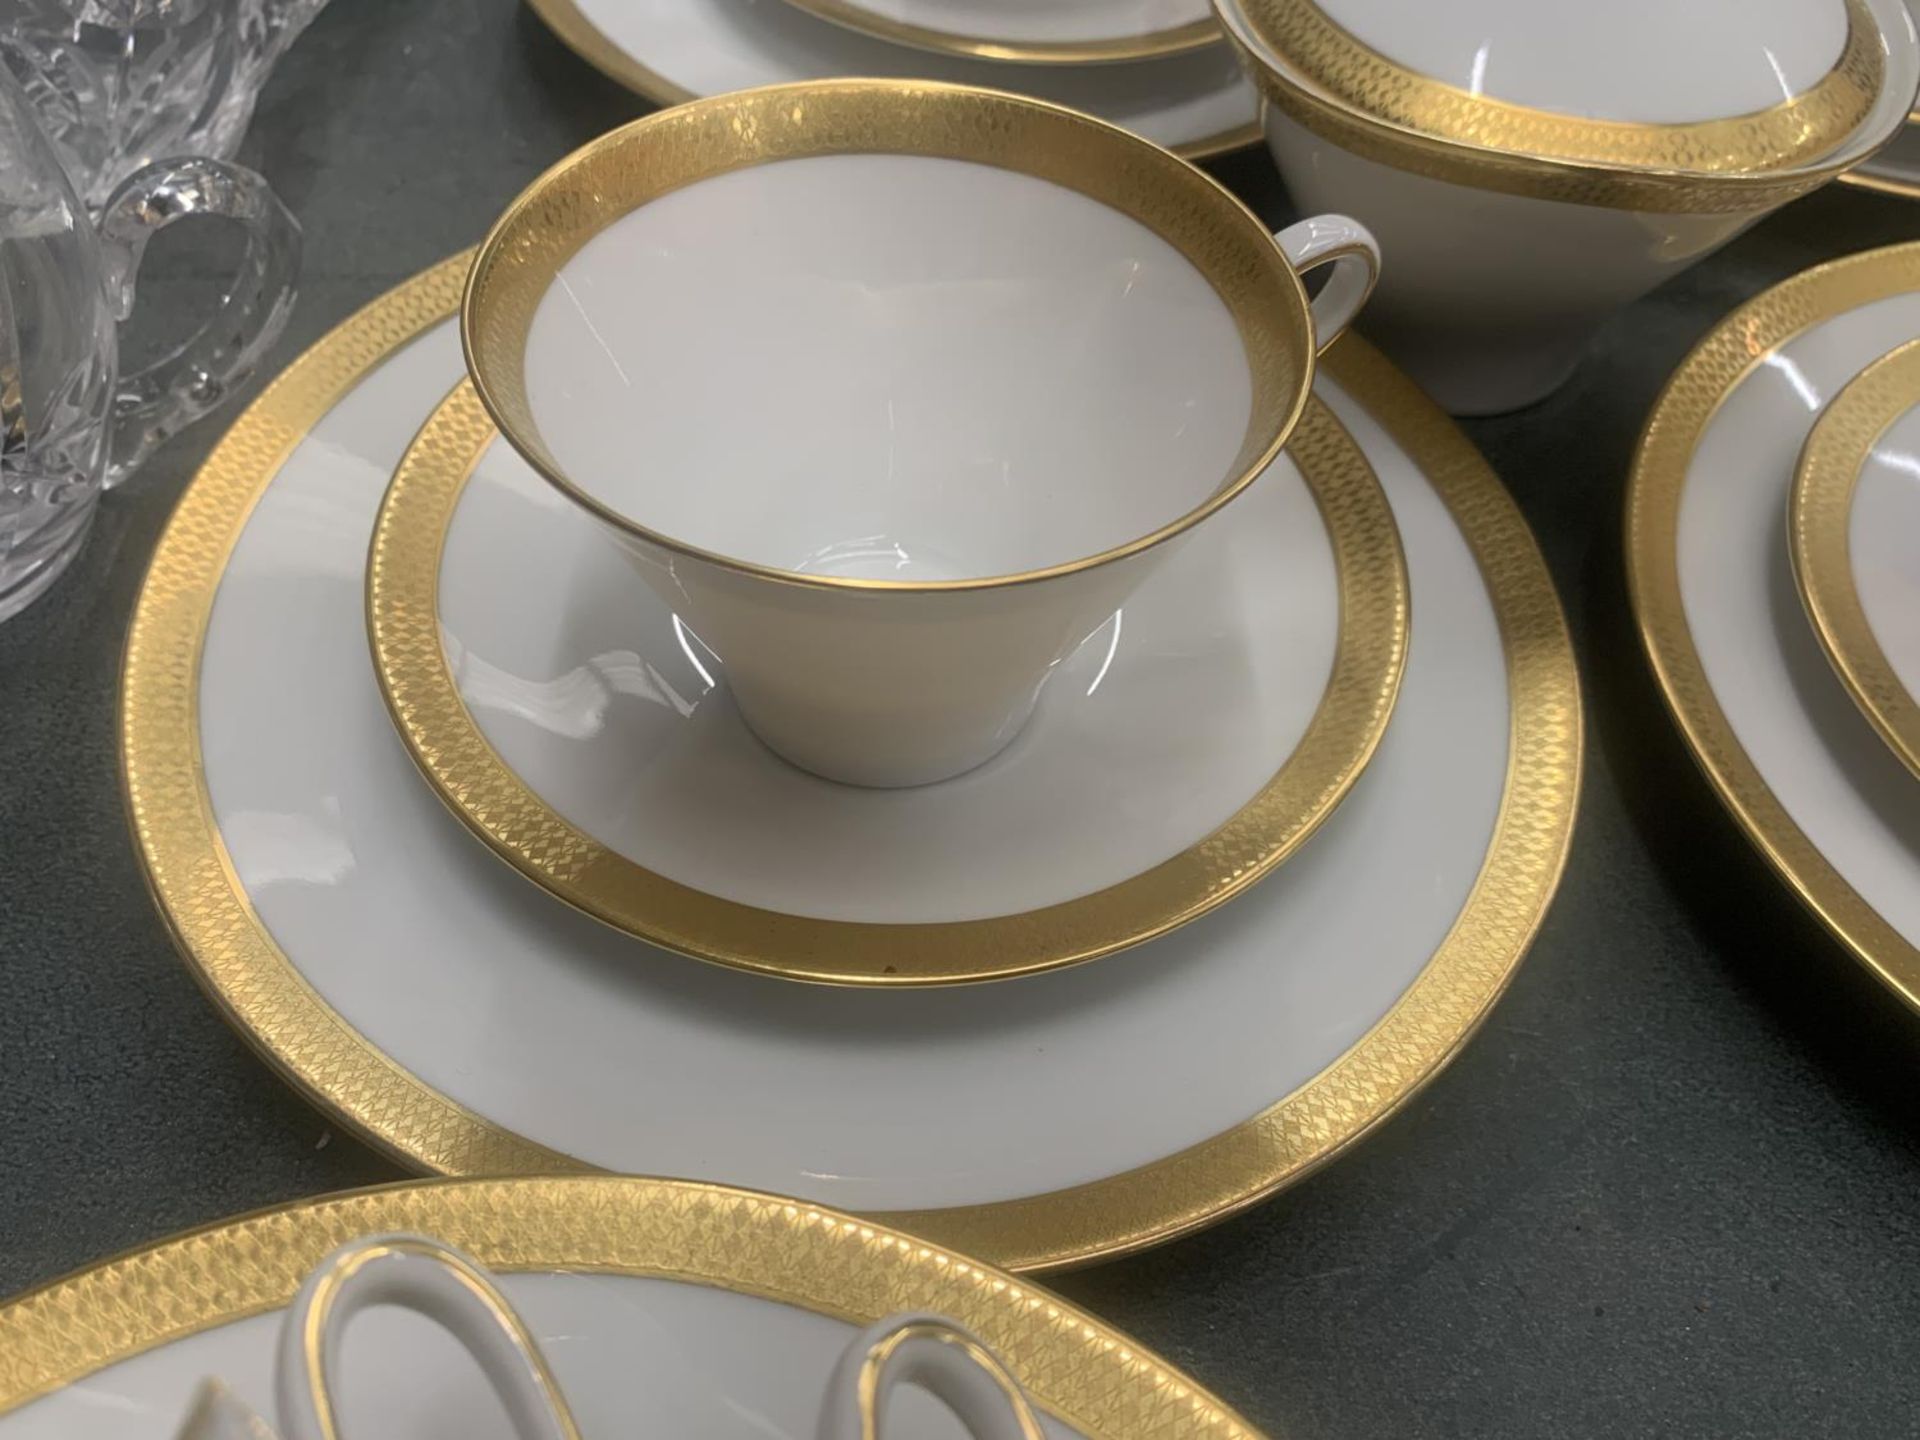 A CHINA PART TEASET IN WHITE WITH GILD TO THE RIMS TO INCLUDE A SUGAR BOWL, CUPS, SAUCERS AND SIDE - Image 2 of 4